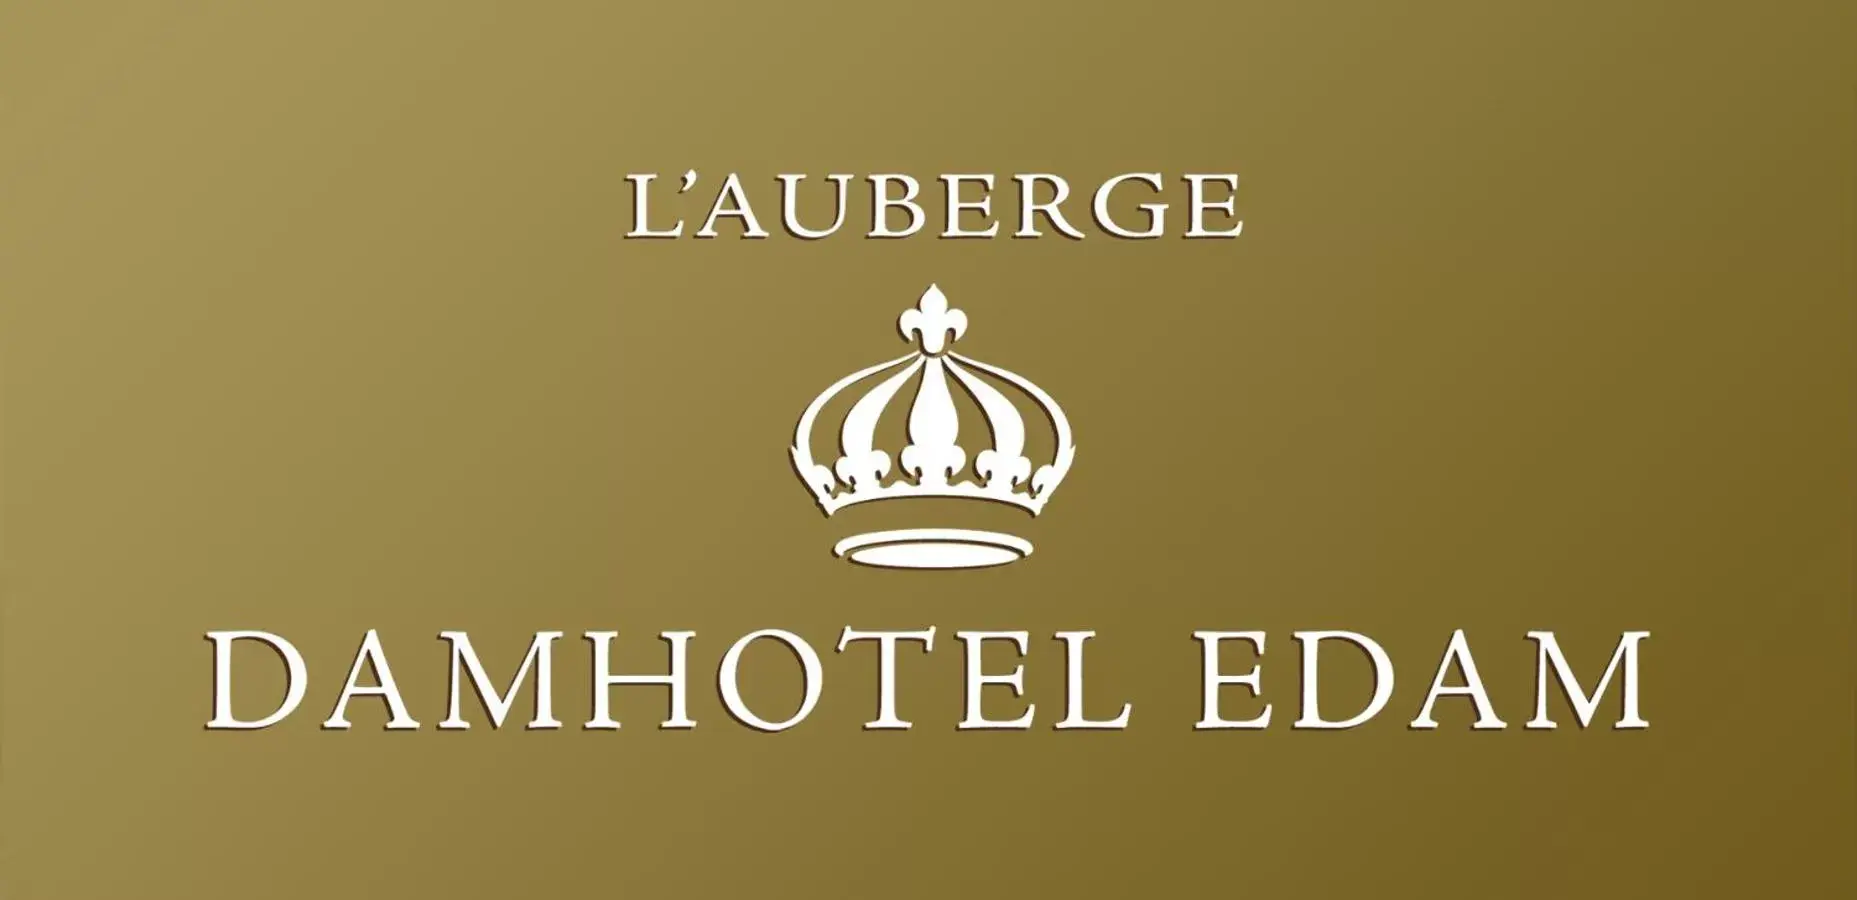 Property logo or sign, Property Logo/Sign in l'Auberge Damhotel